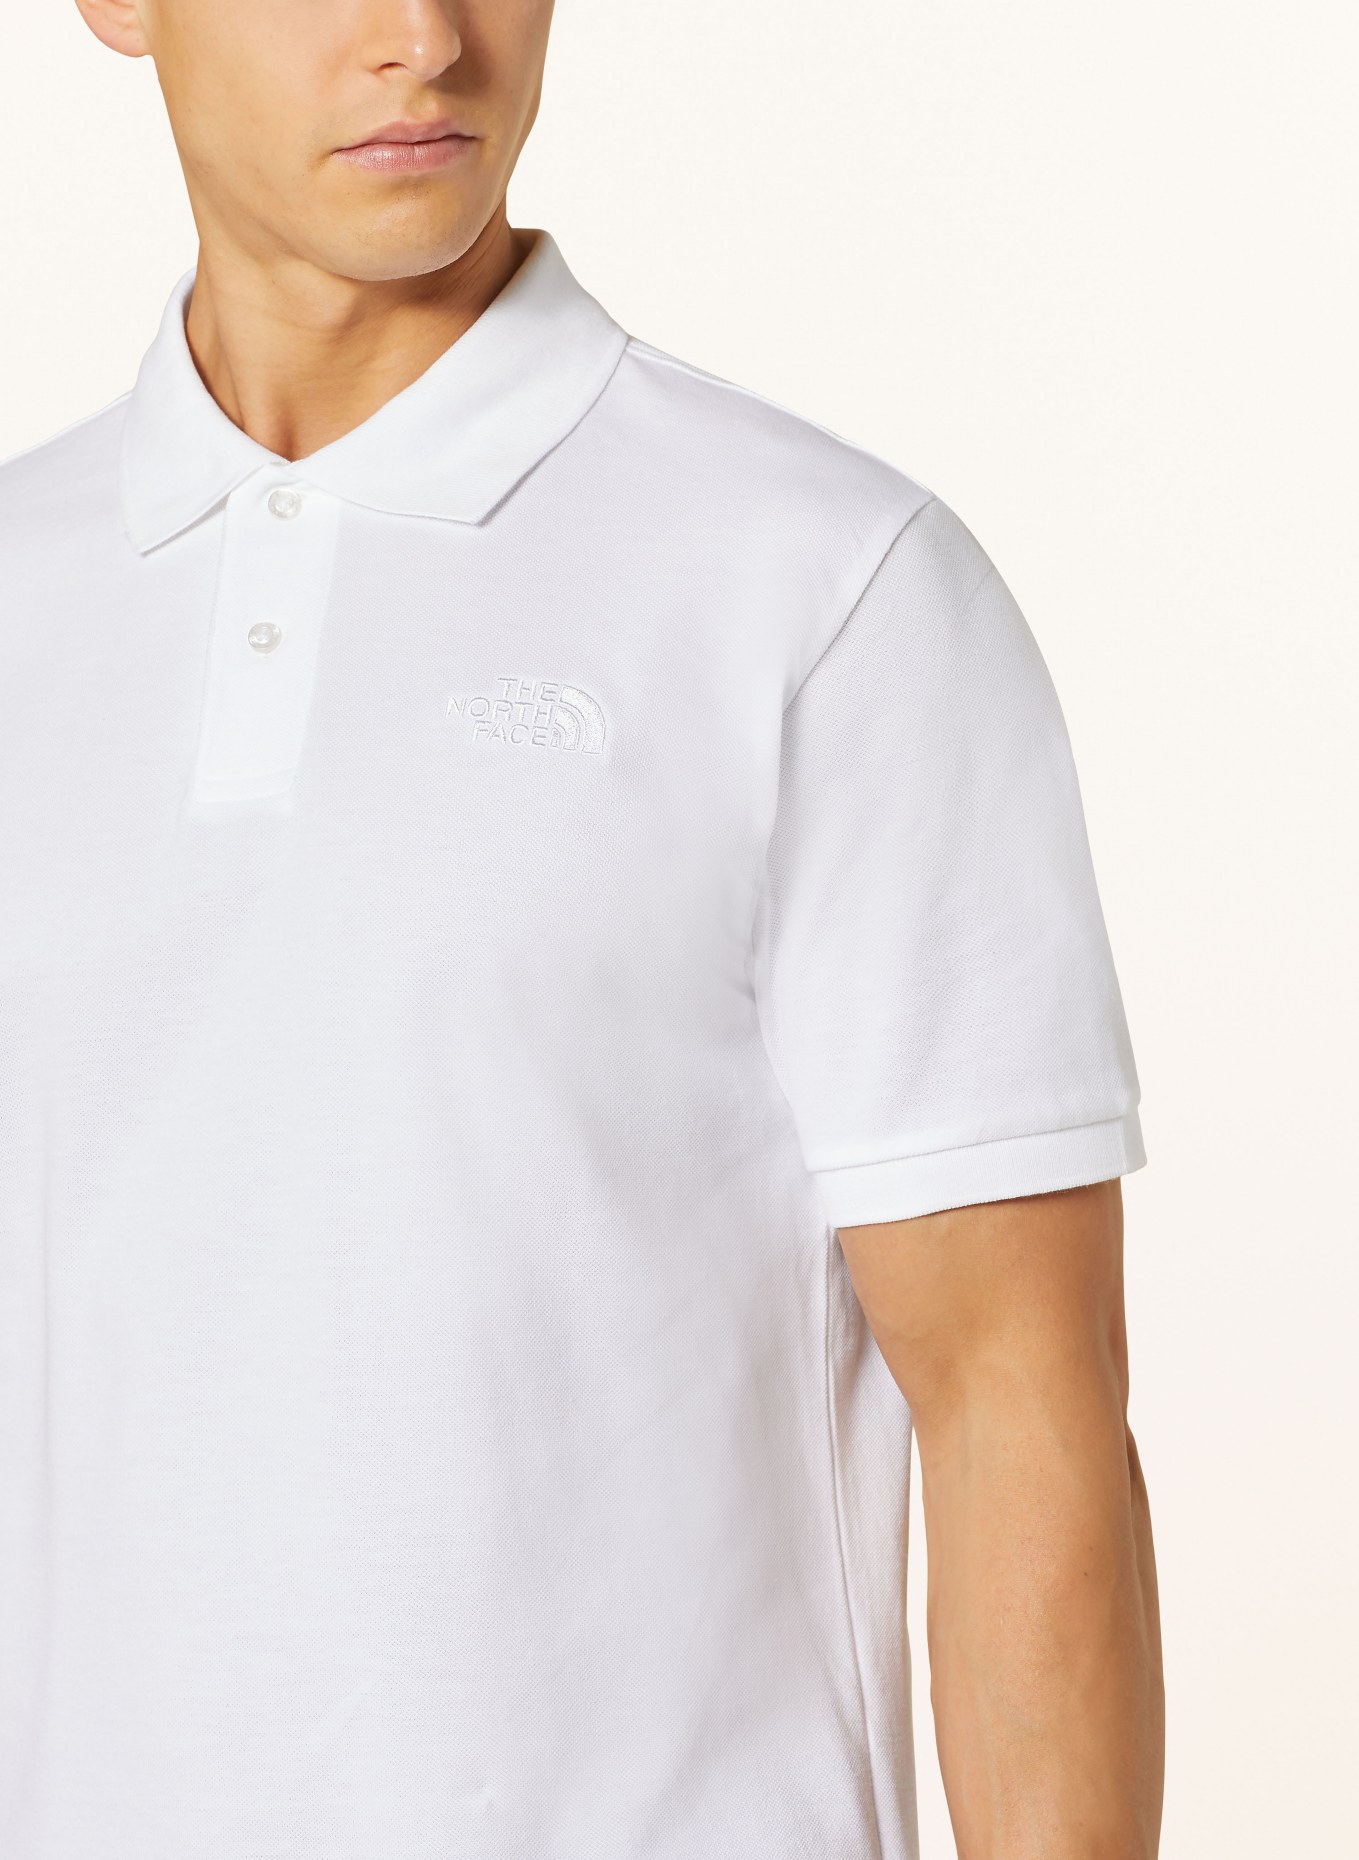 THE NORTH FACE Performance polo shirt, Color: WHITE (Image 4)